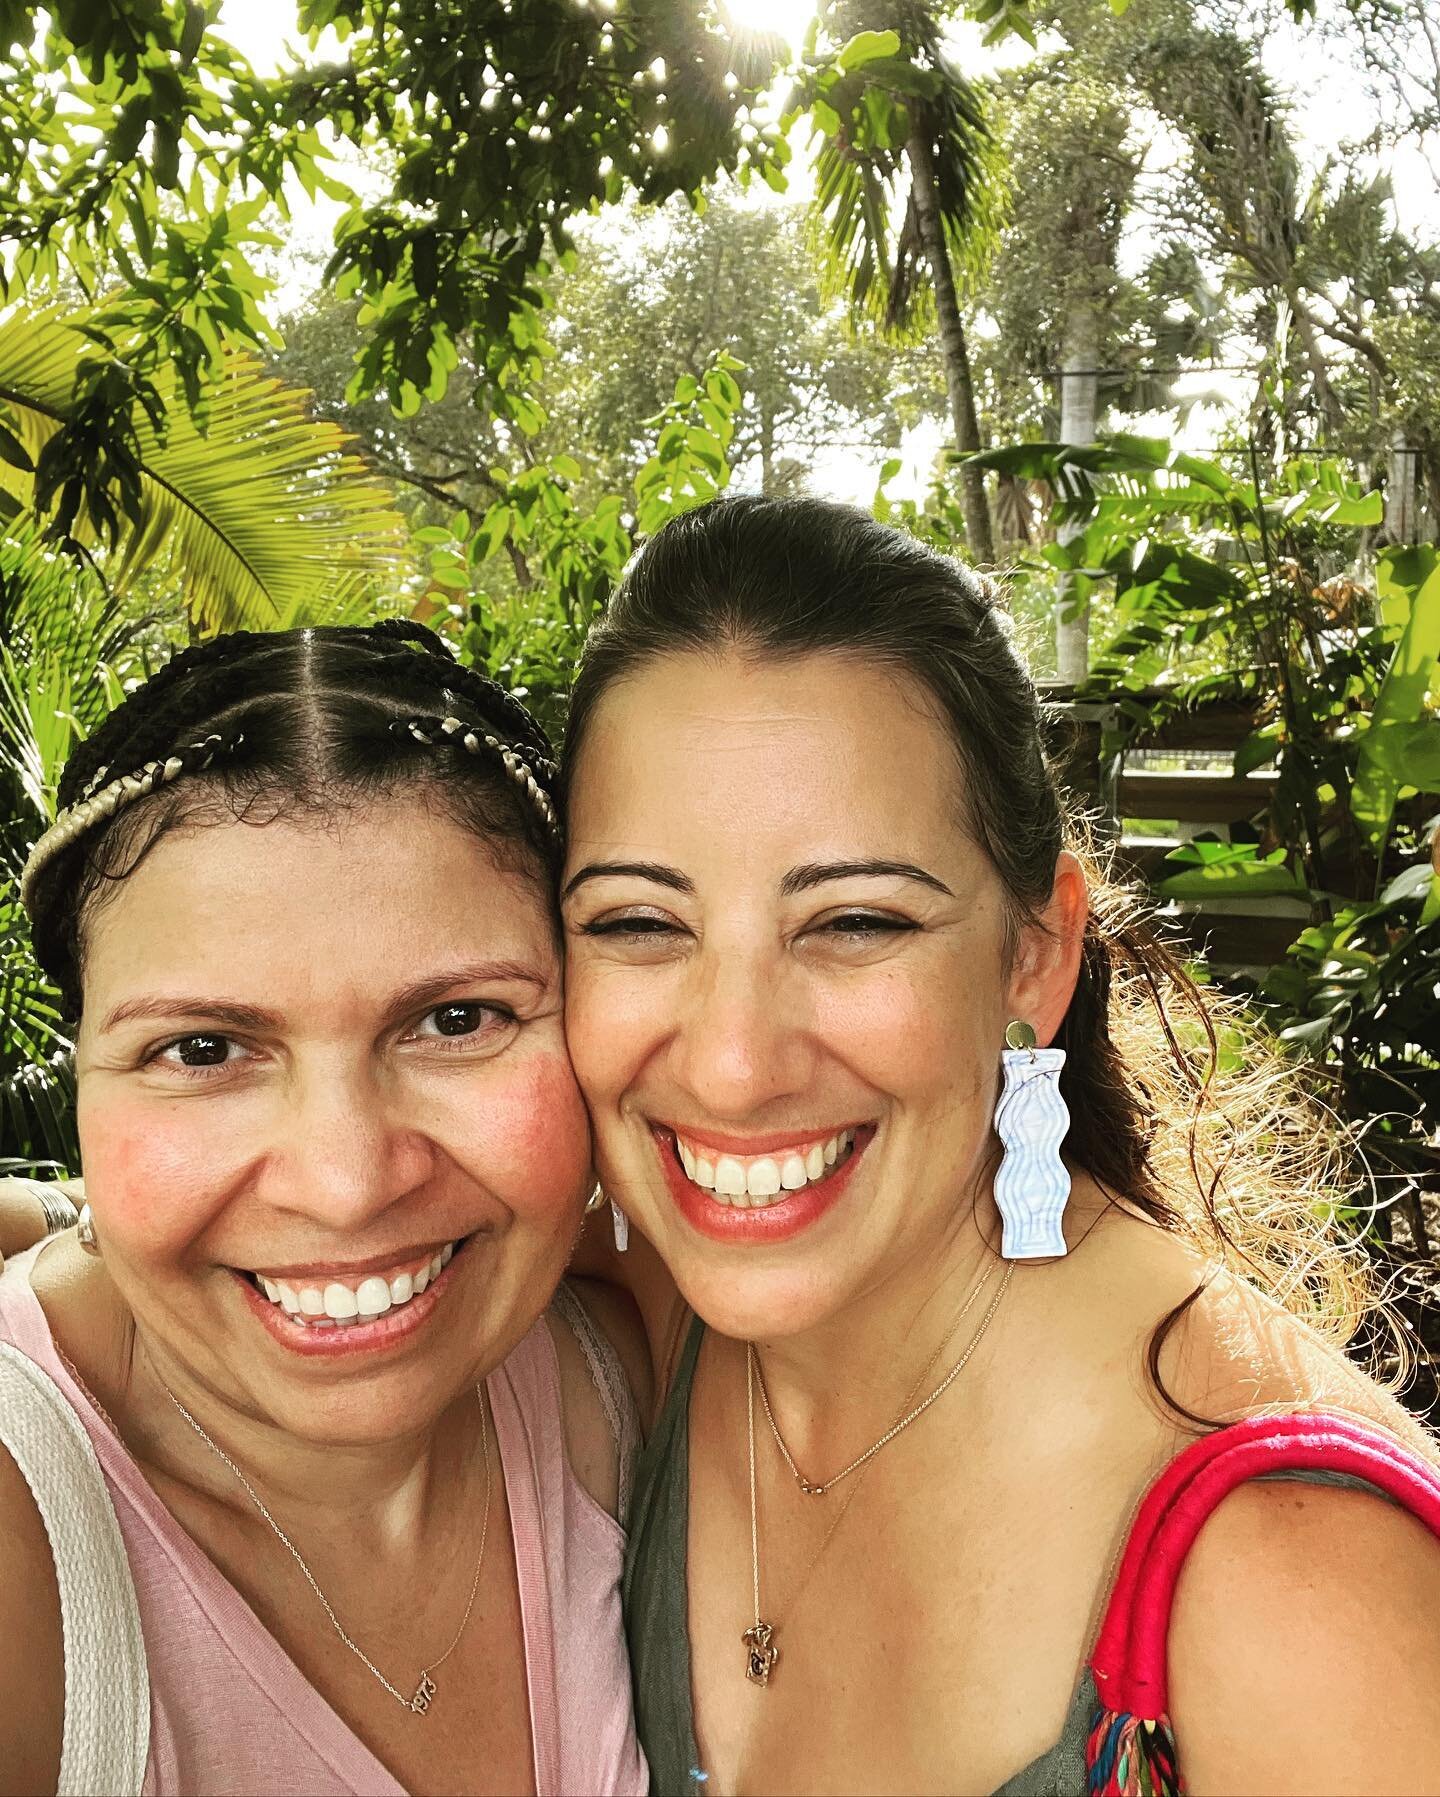 At @aguacate_sanctuaryoflove with my dear friend @imababysquid (who is so nice she even shooed away the roosters for me and kept from laughing when I was afraid of eeeeverything). Love you, Issy. 🥰